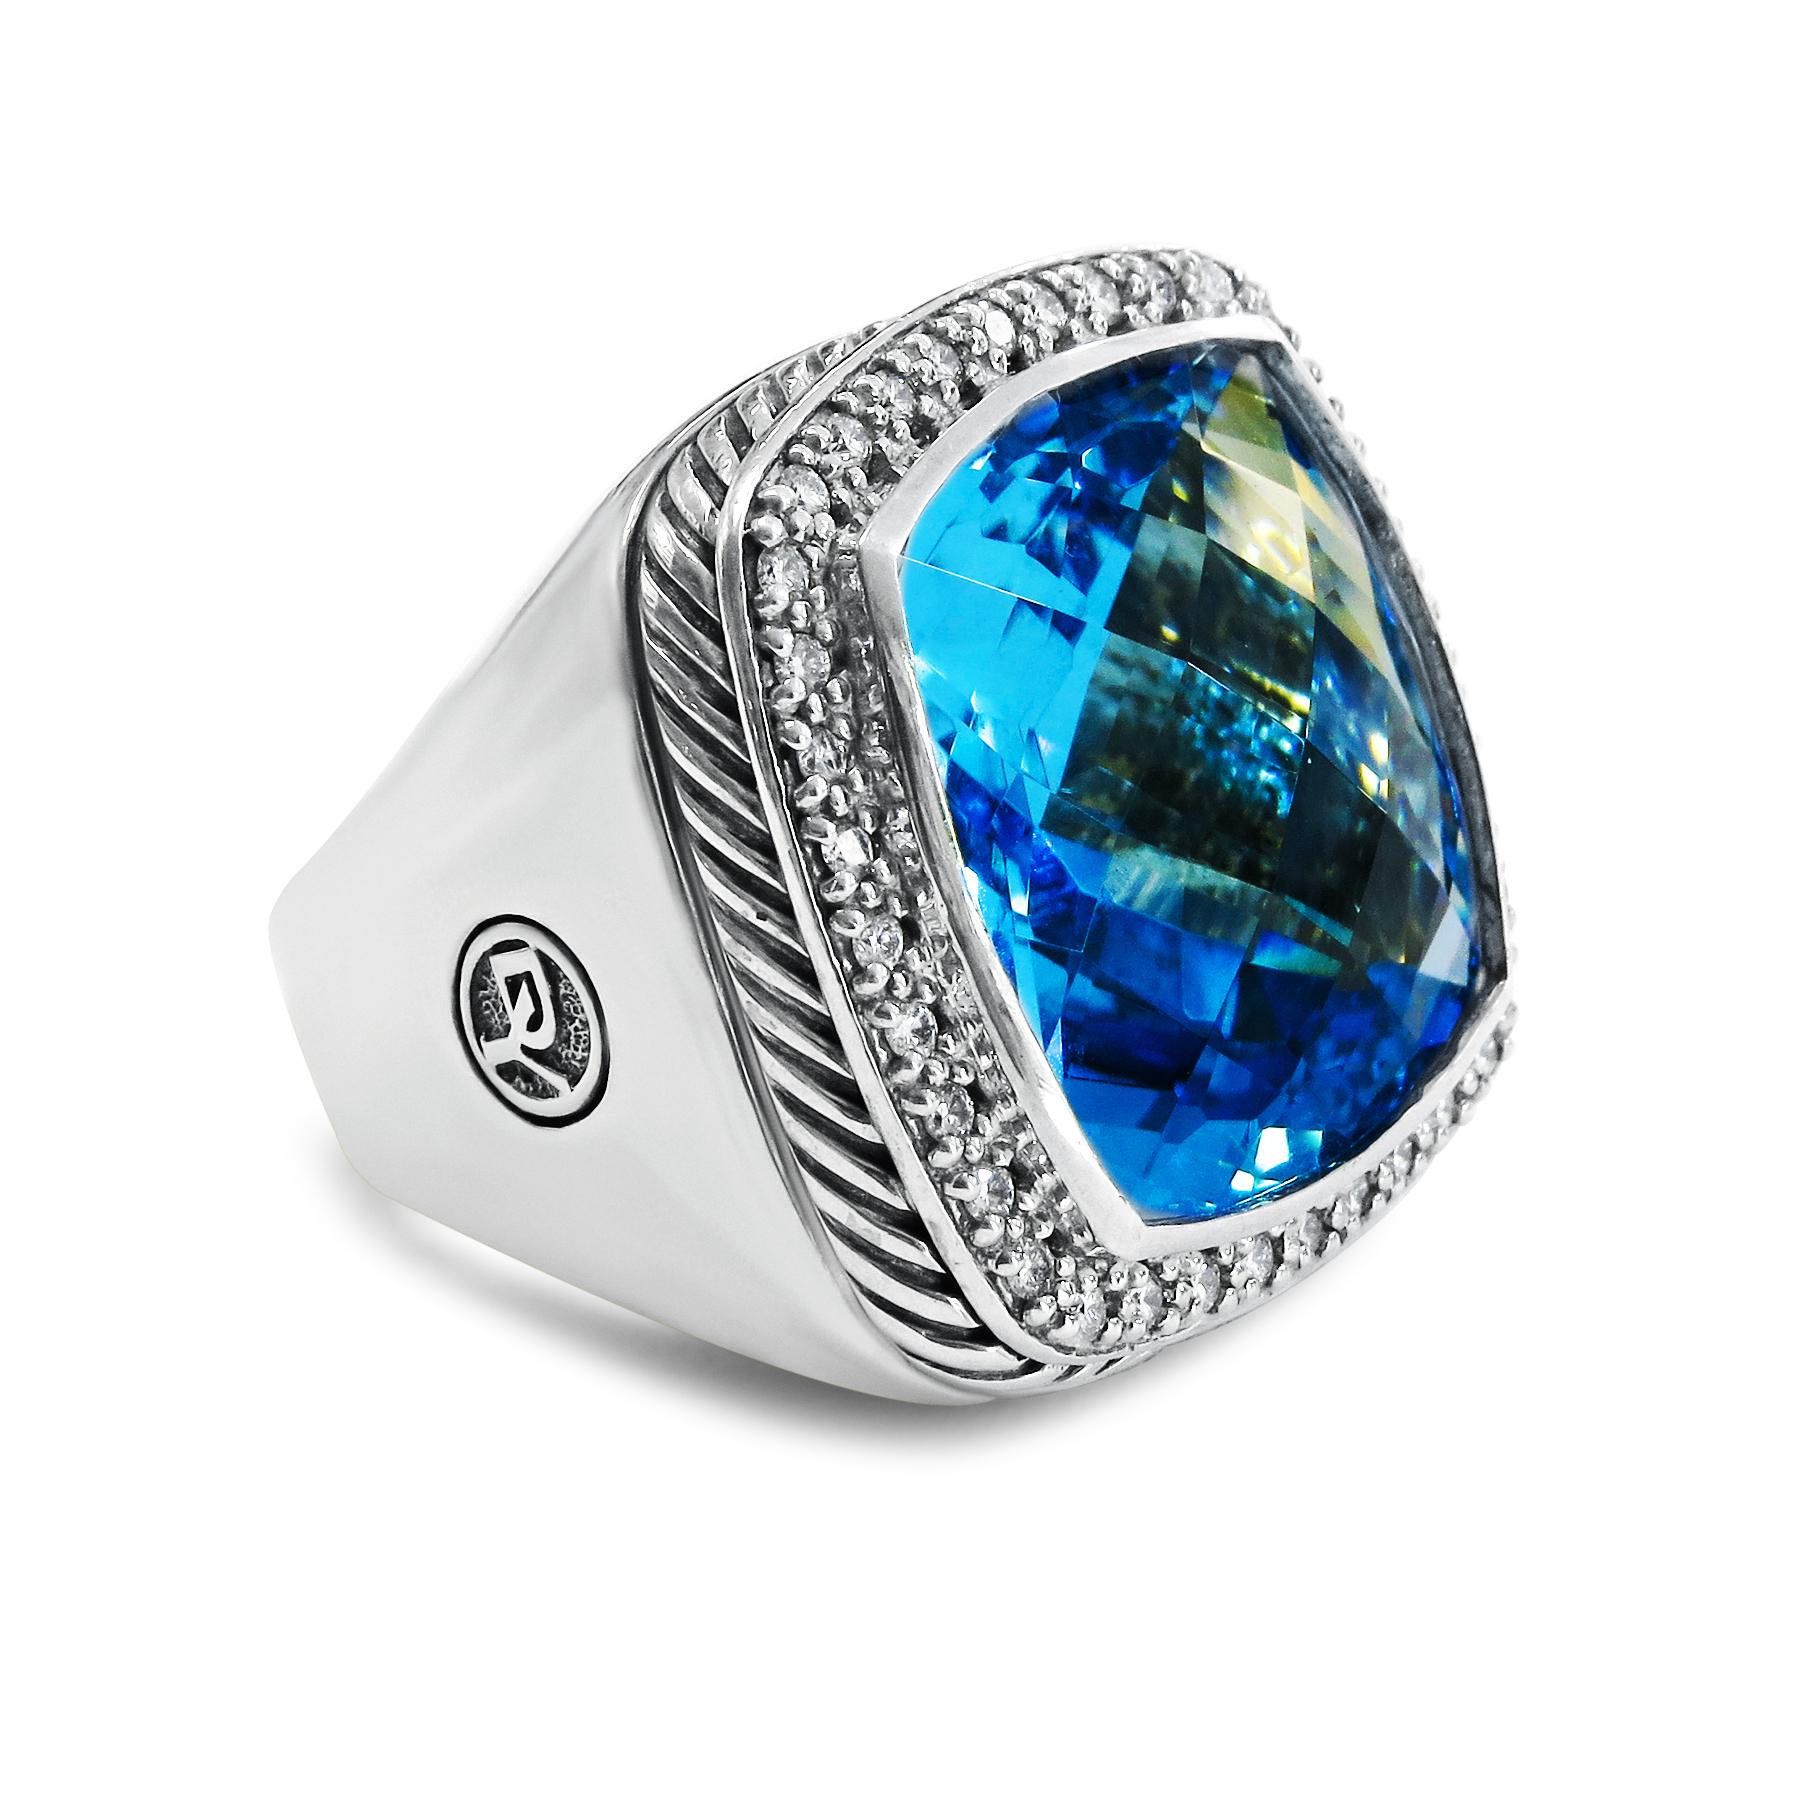 This classic and modern David Yurman ring features a princess-cut 20mm by 20mm  blue topaz and 0.44-carat diamonds that accents around it. It is further accented by a sterling silver shank design. It weighs 27.4 grams and the size is 7.25 to give